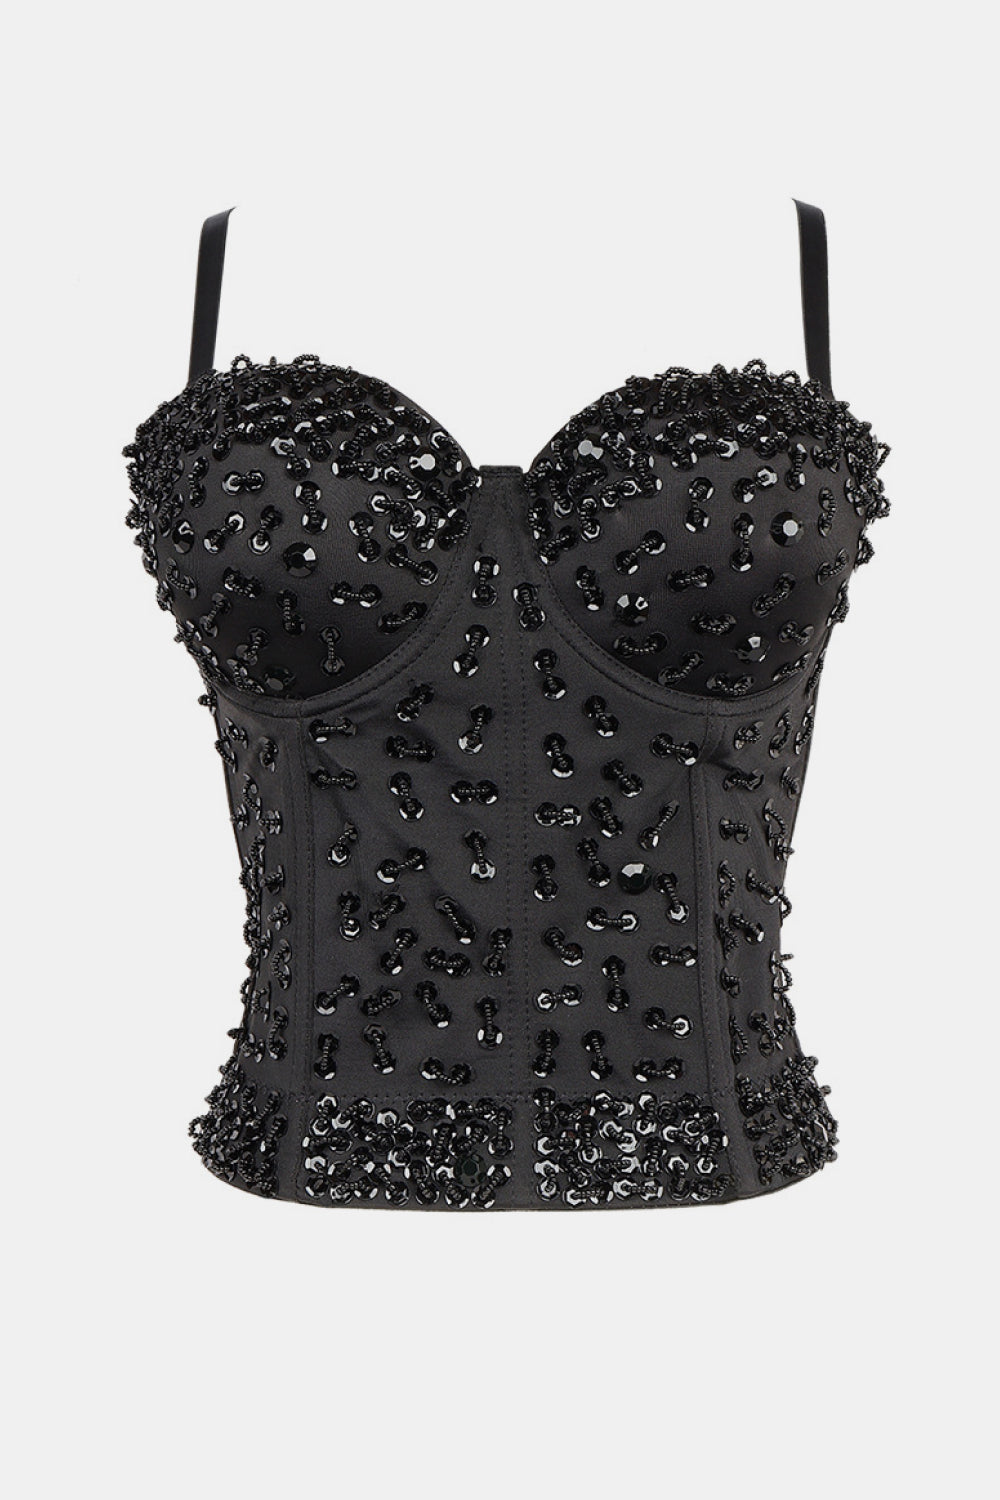 Sequined Bustier Boning